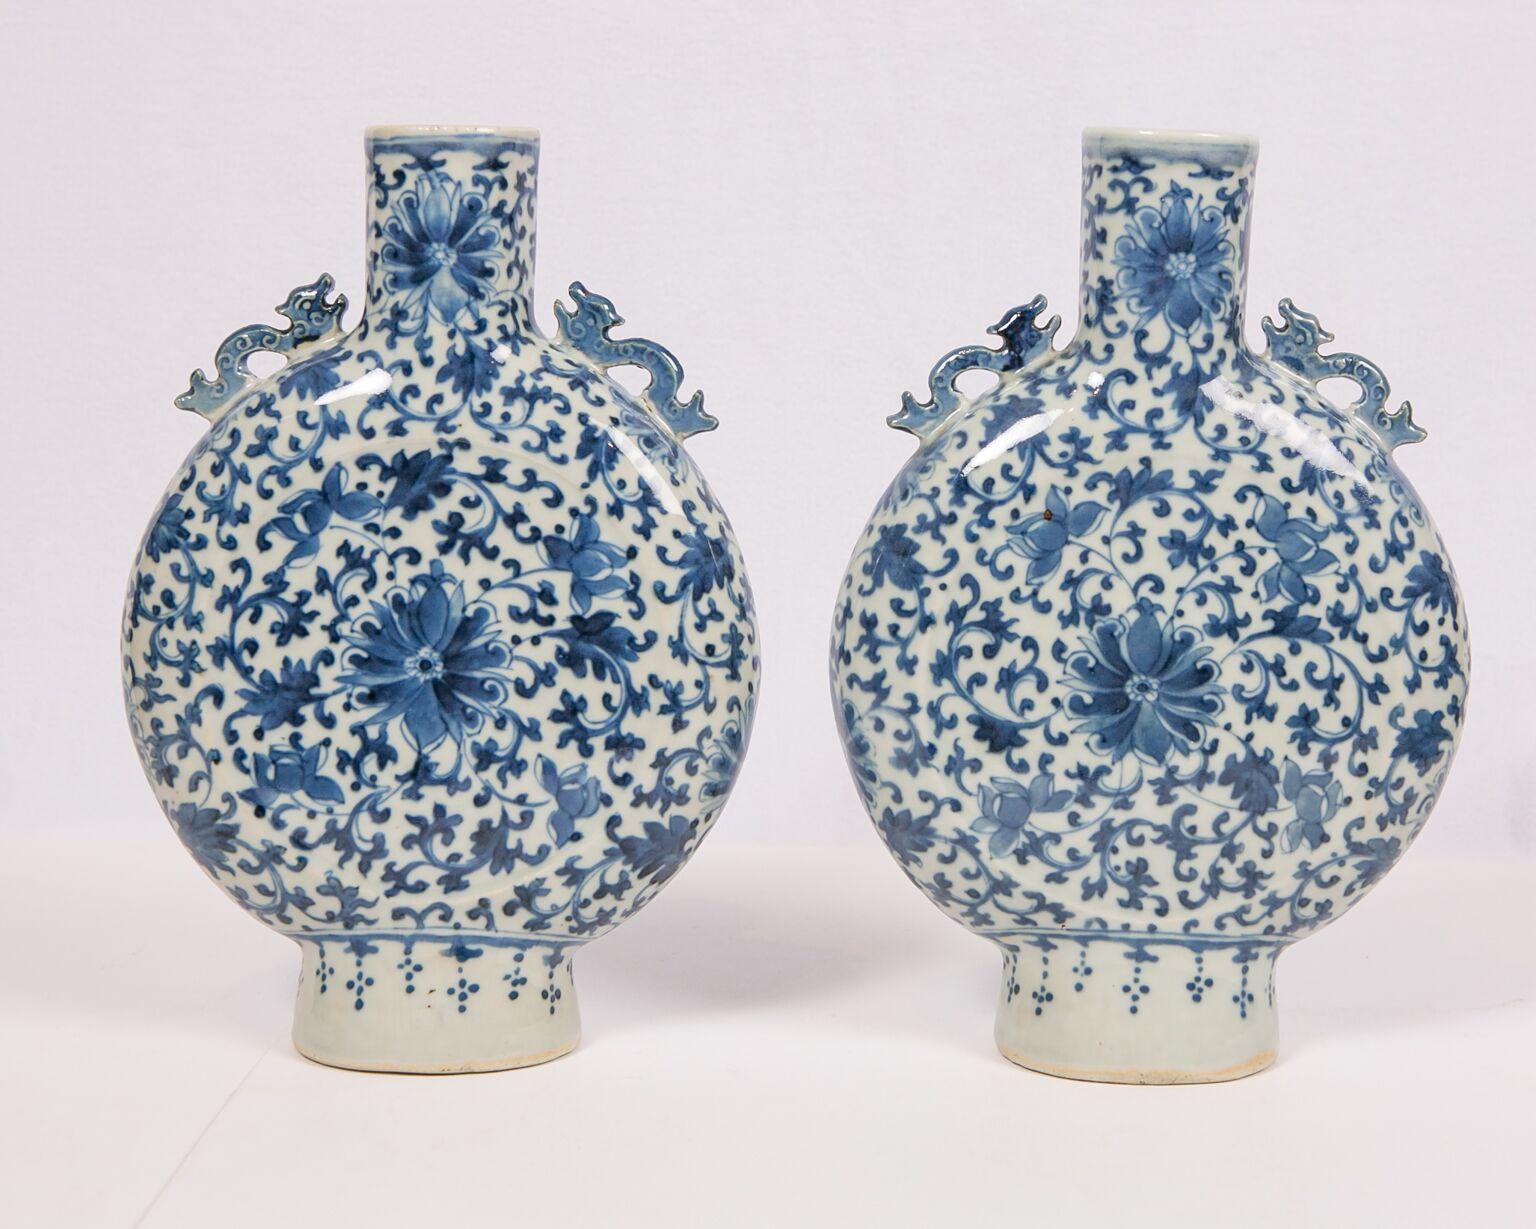 This pair of Chinese blue and w0hite moon flasks date to the 19th century of the Qing dynasty (1644-1911). The body of each vase is fully decorated with floral scroll patterns, executed in a freehand and vibrant style. The flower design in the